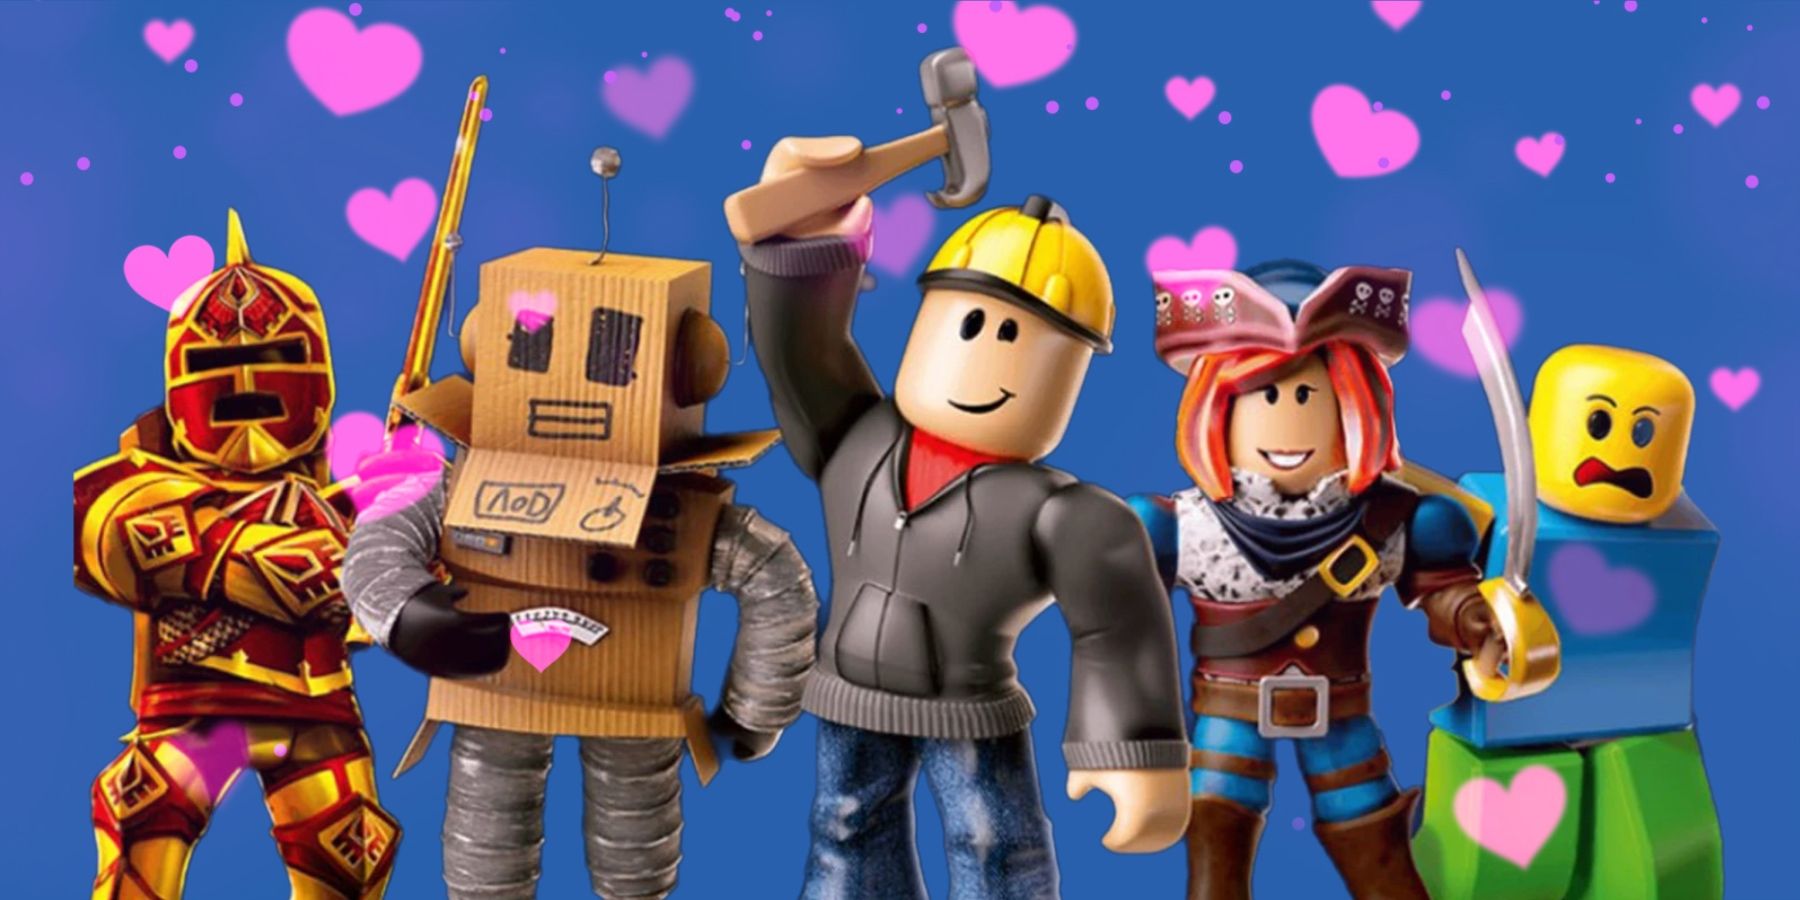 ONLINE DATERS IN ROBLOX 